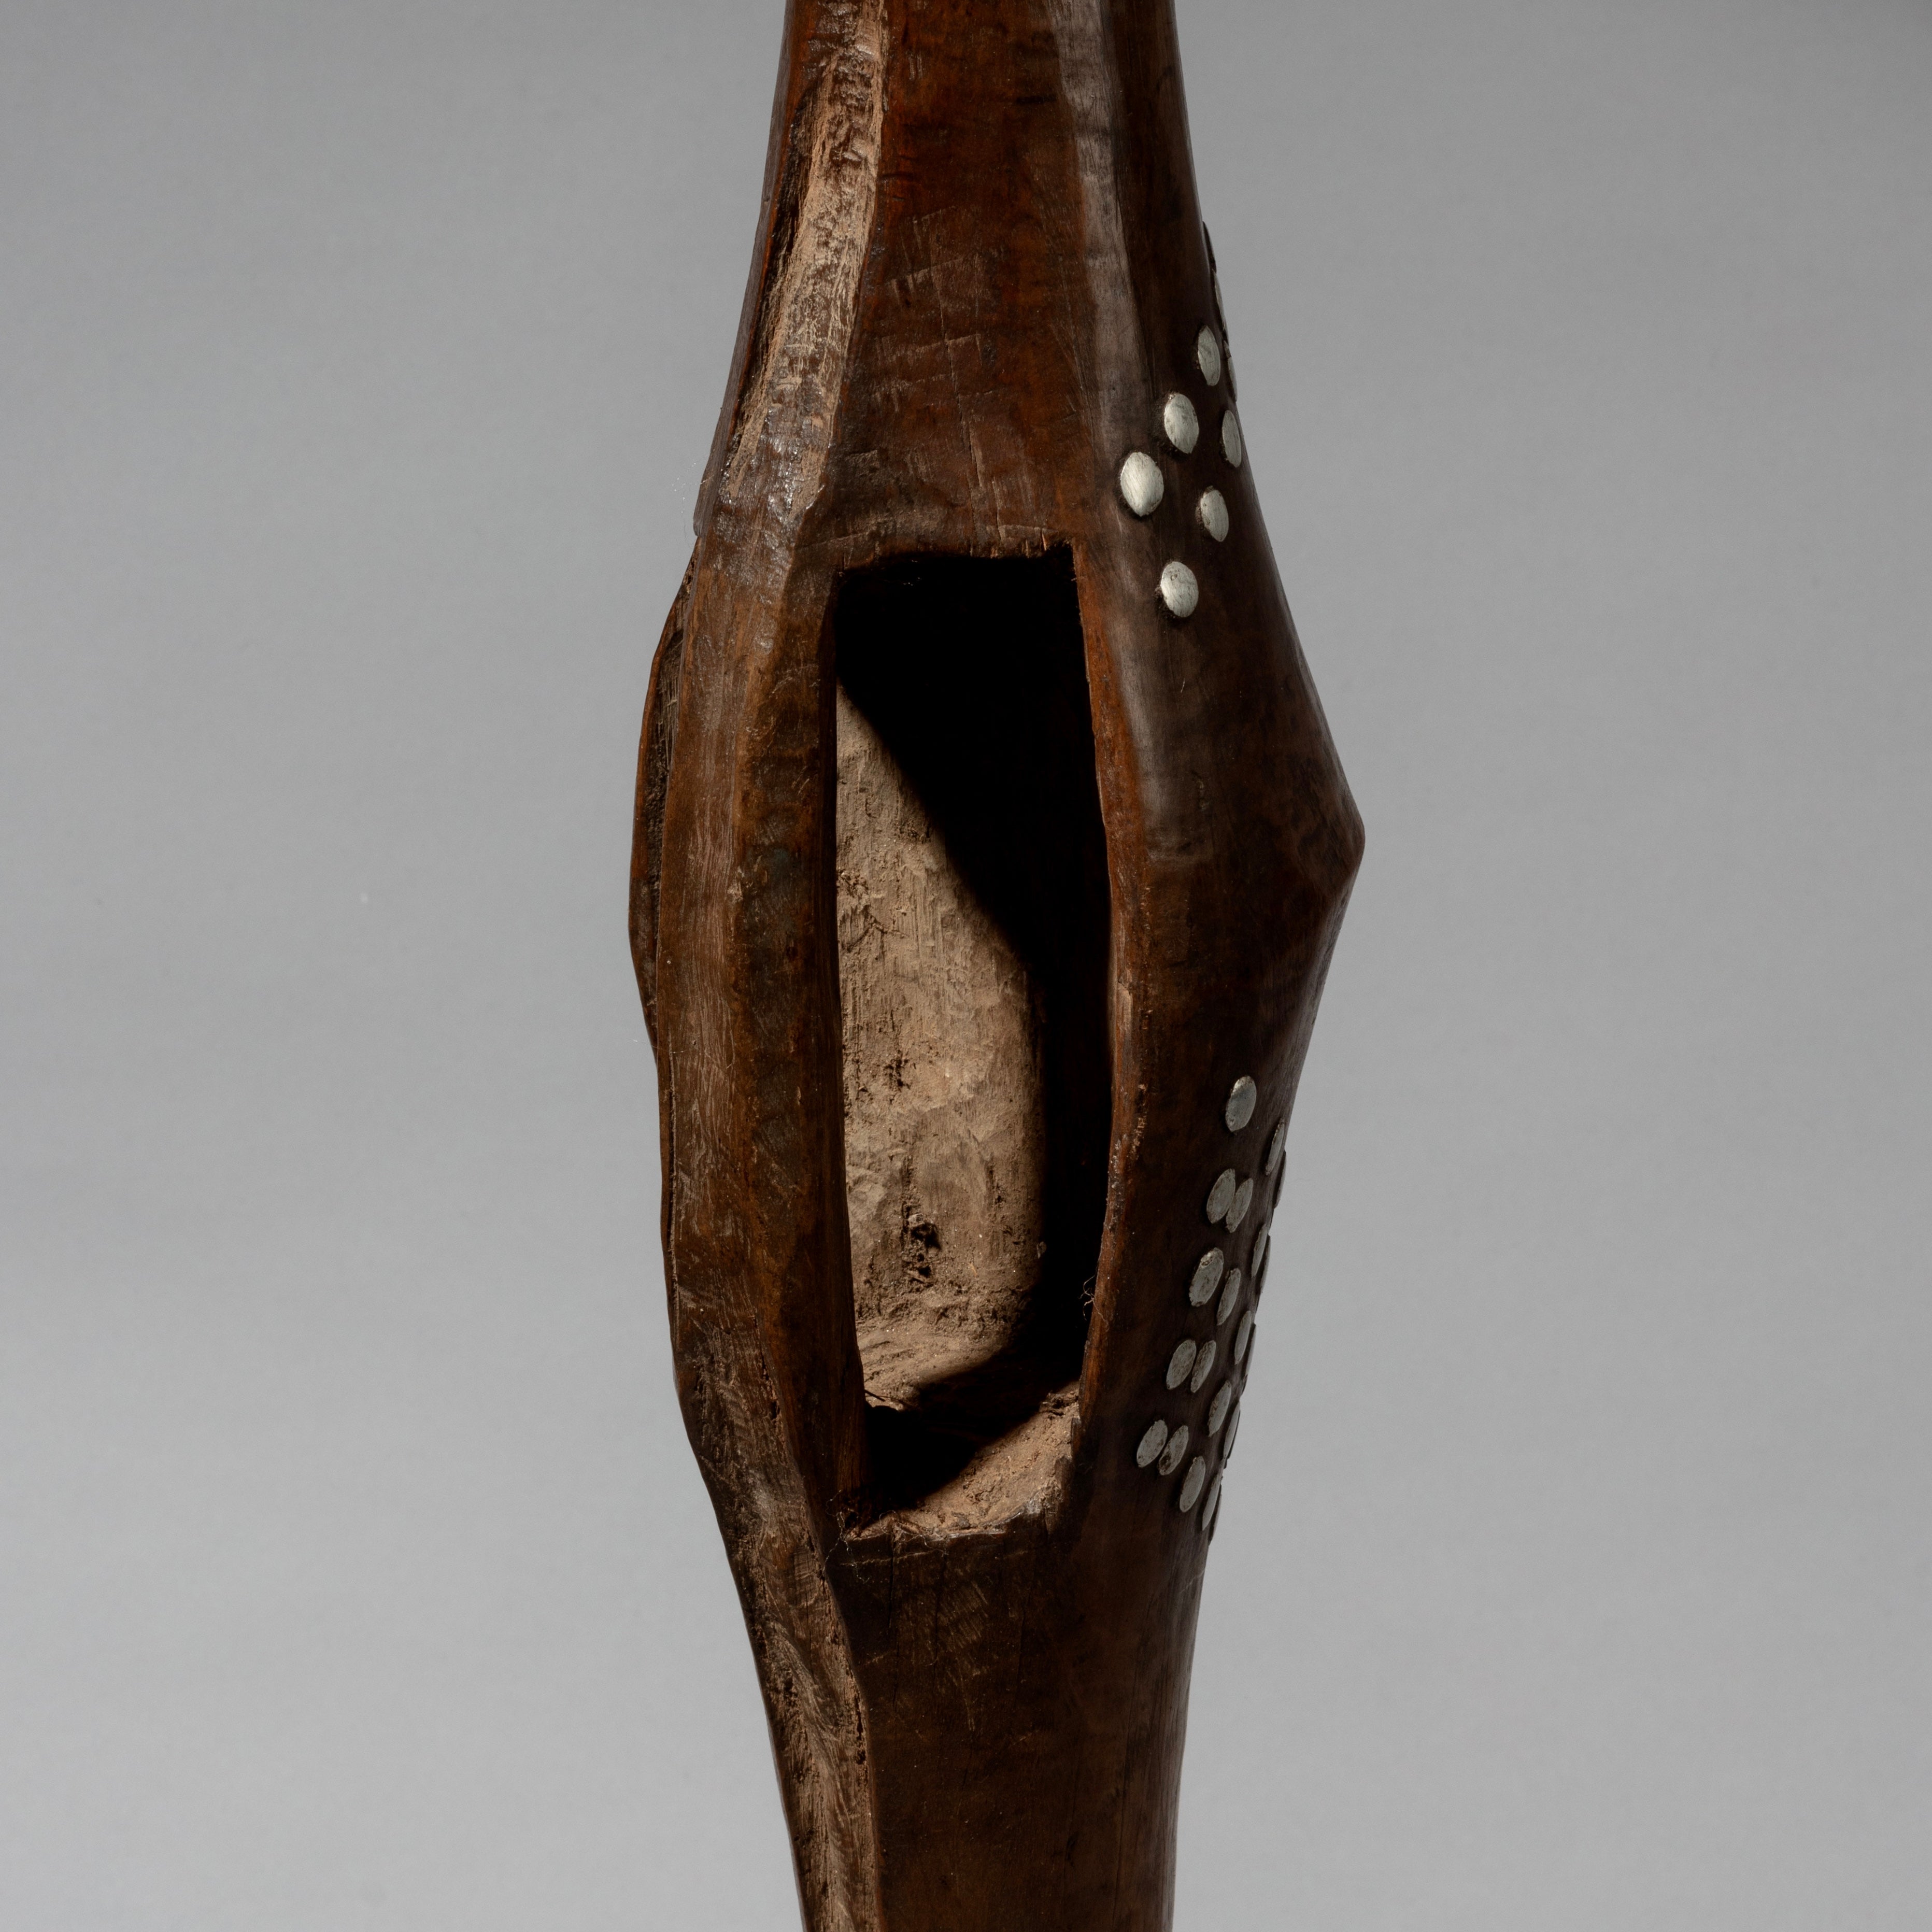 A FINE DINKA SHIELD WITH INLAID METAL DOT FACE, E. AFRICA( No 2073 )